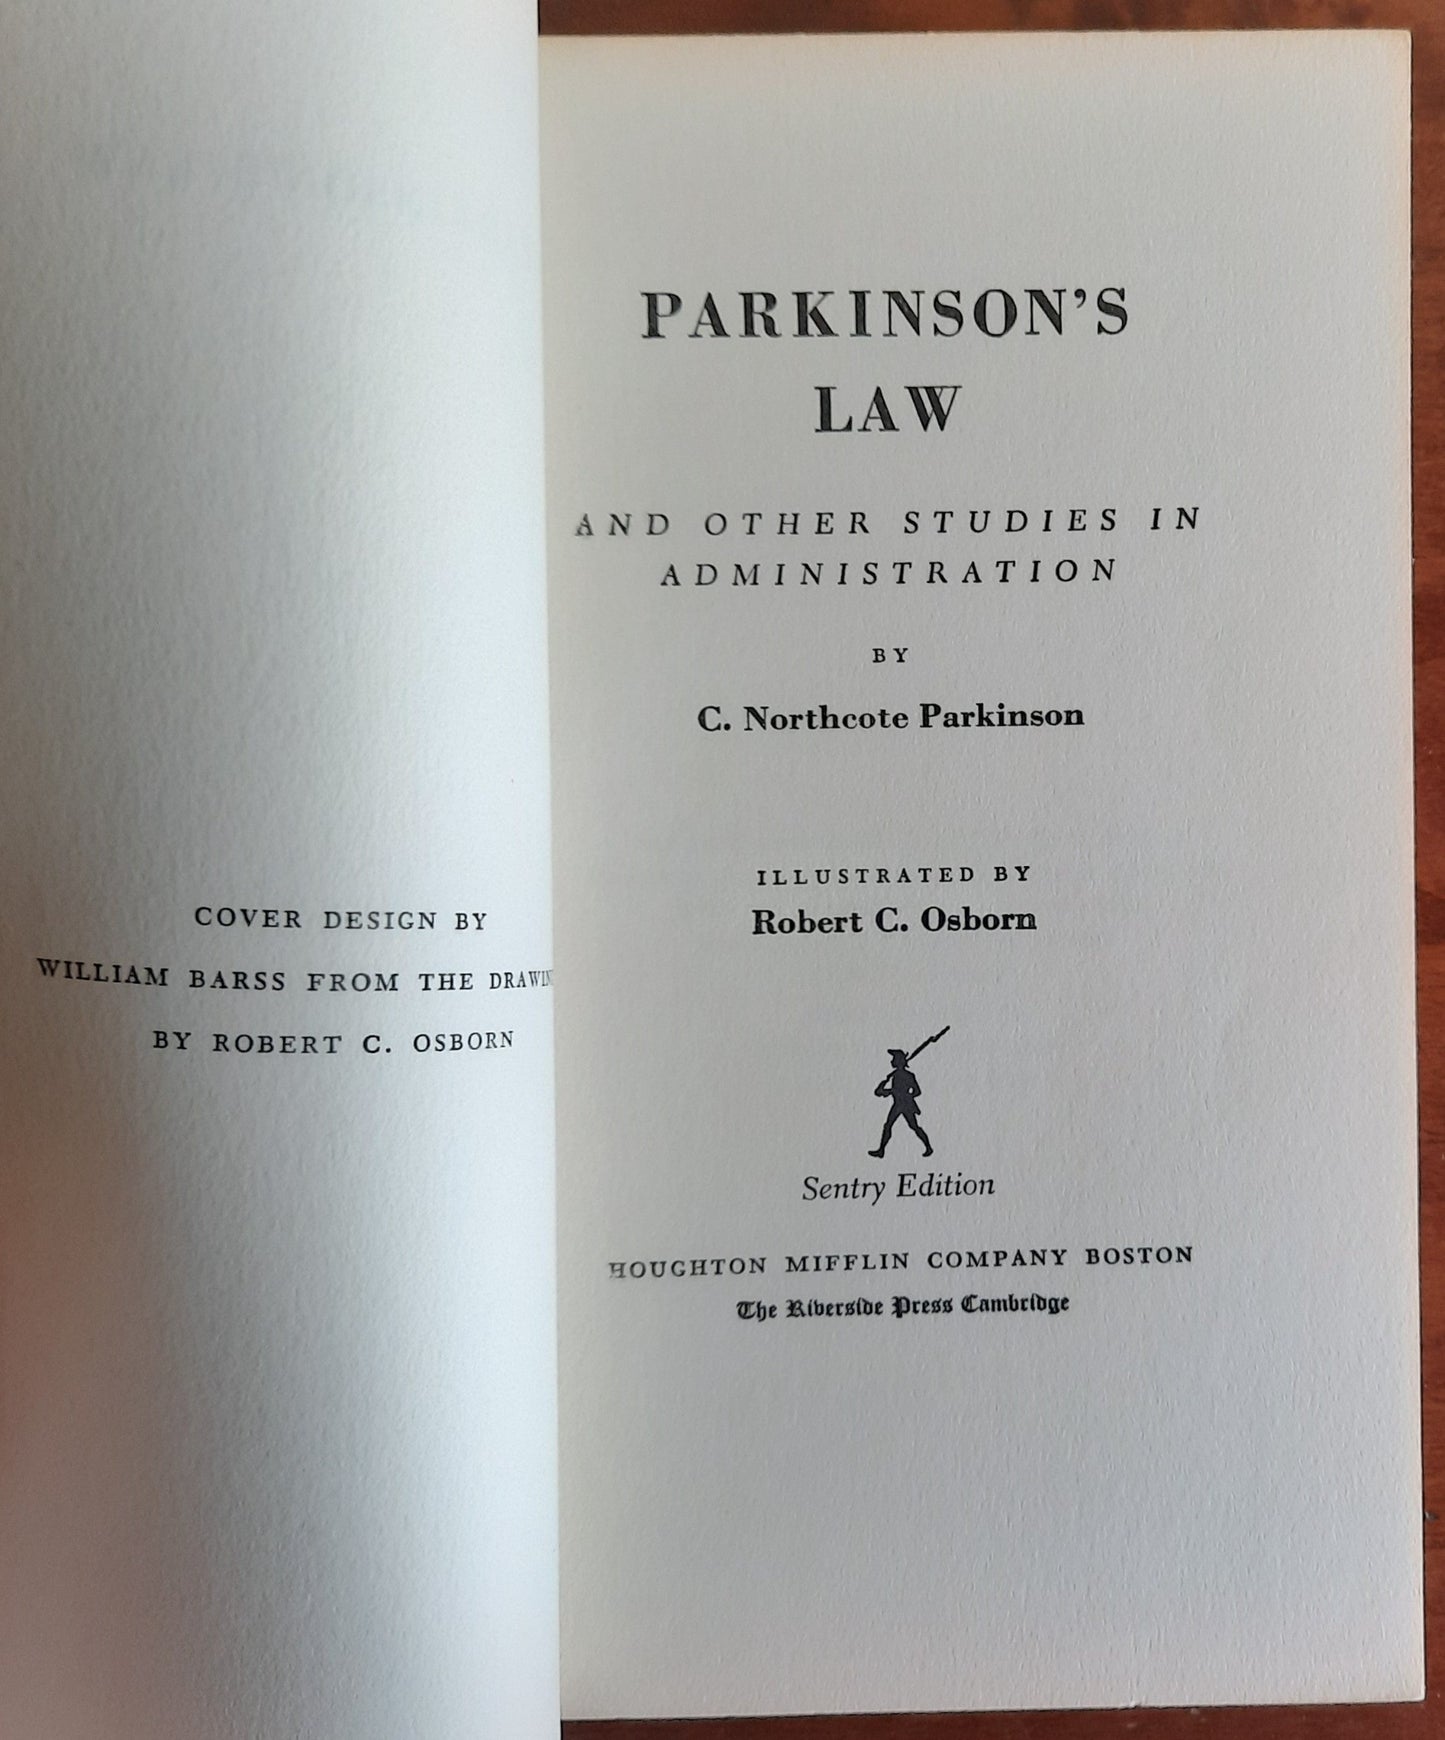 Parkinson's Law and Other Studies in Administration